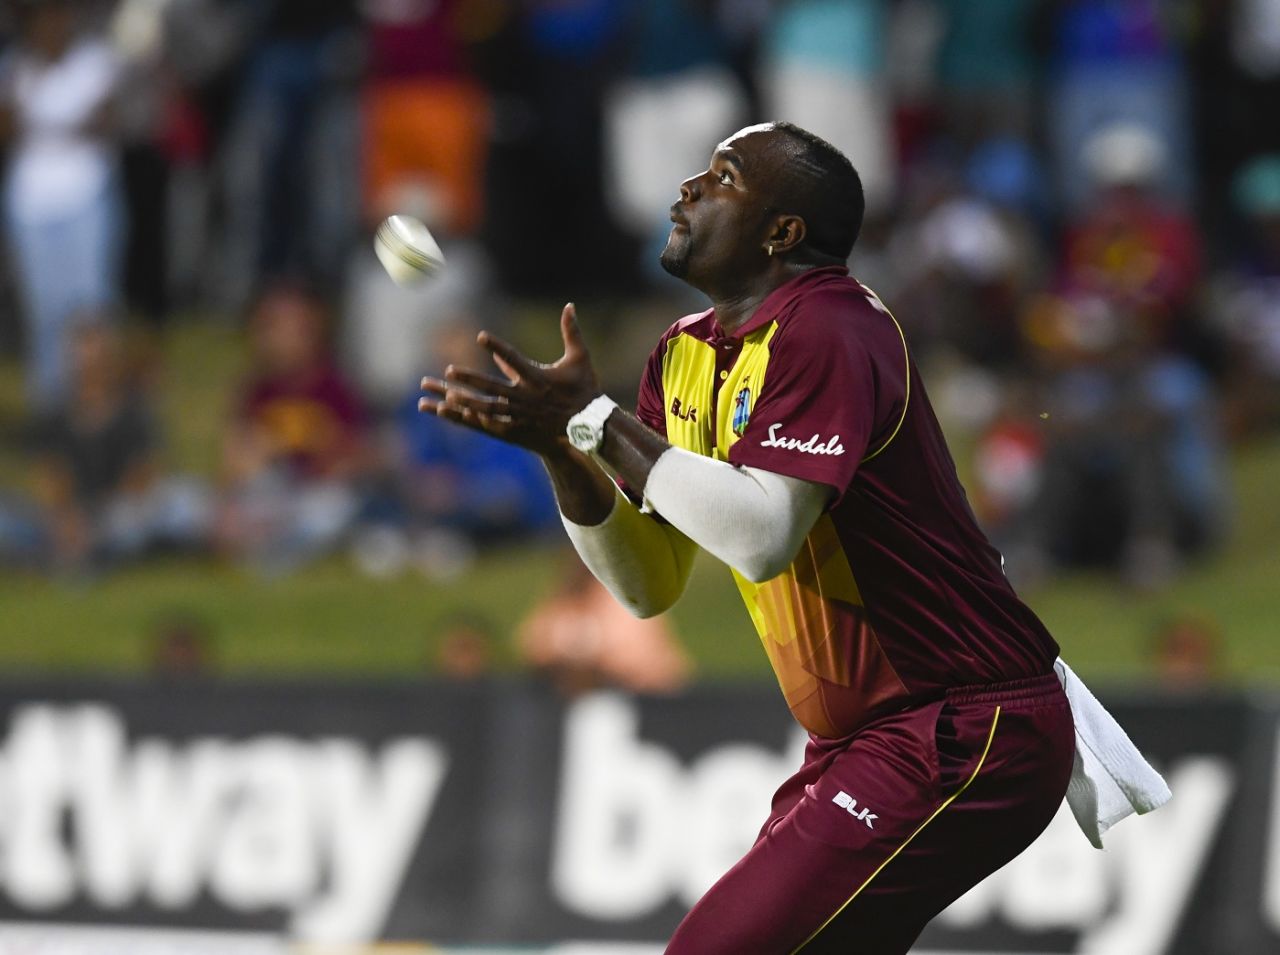 Eyes on the prize? Ashley Nurse settles under the ball for a catch, West Indies v Bangladesh, 1st T20I, St Kitts, July 31, 2018